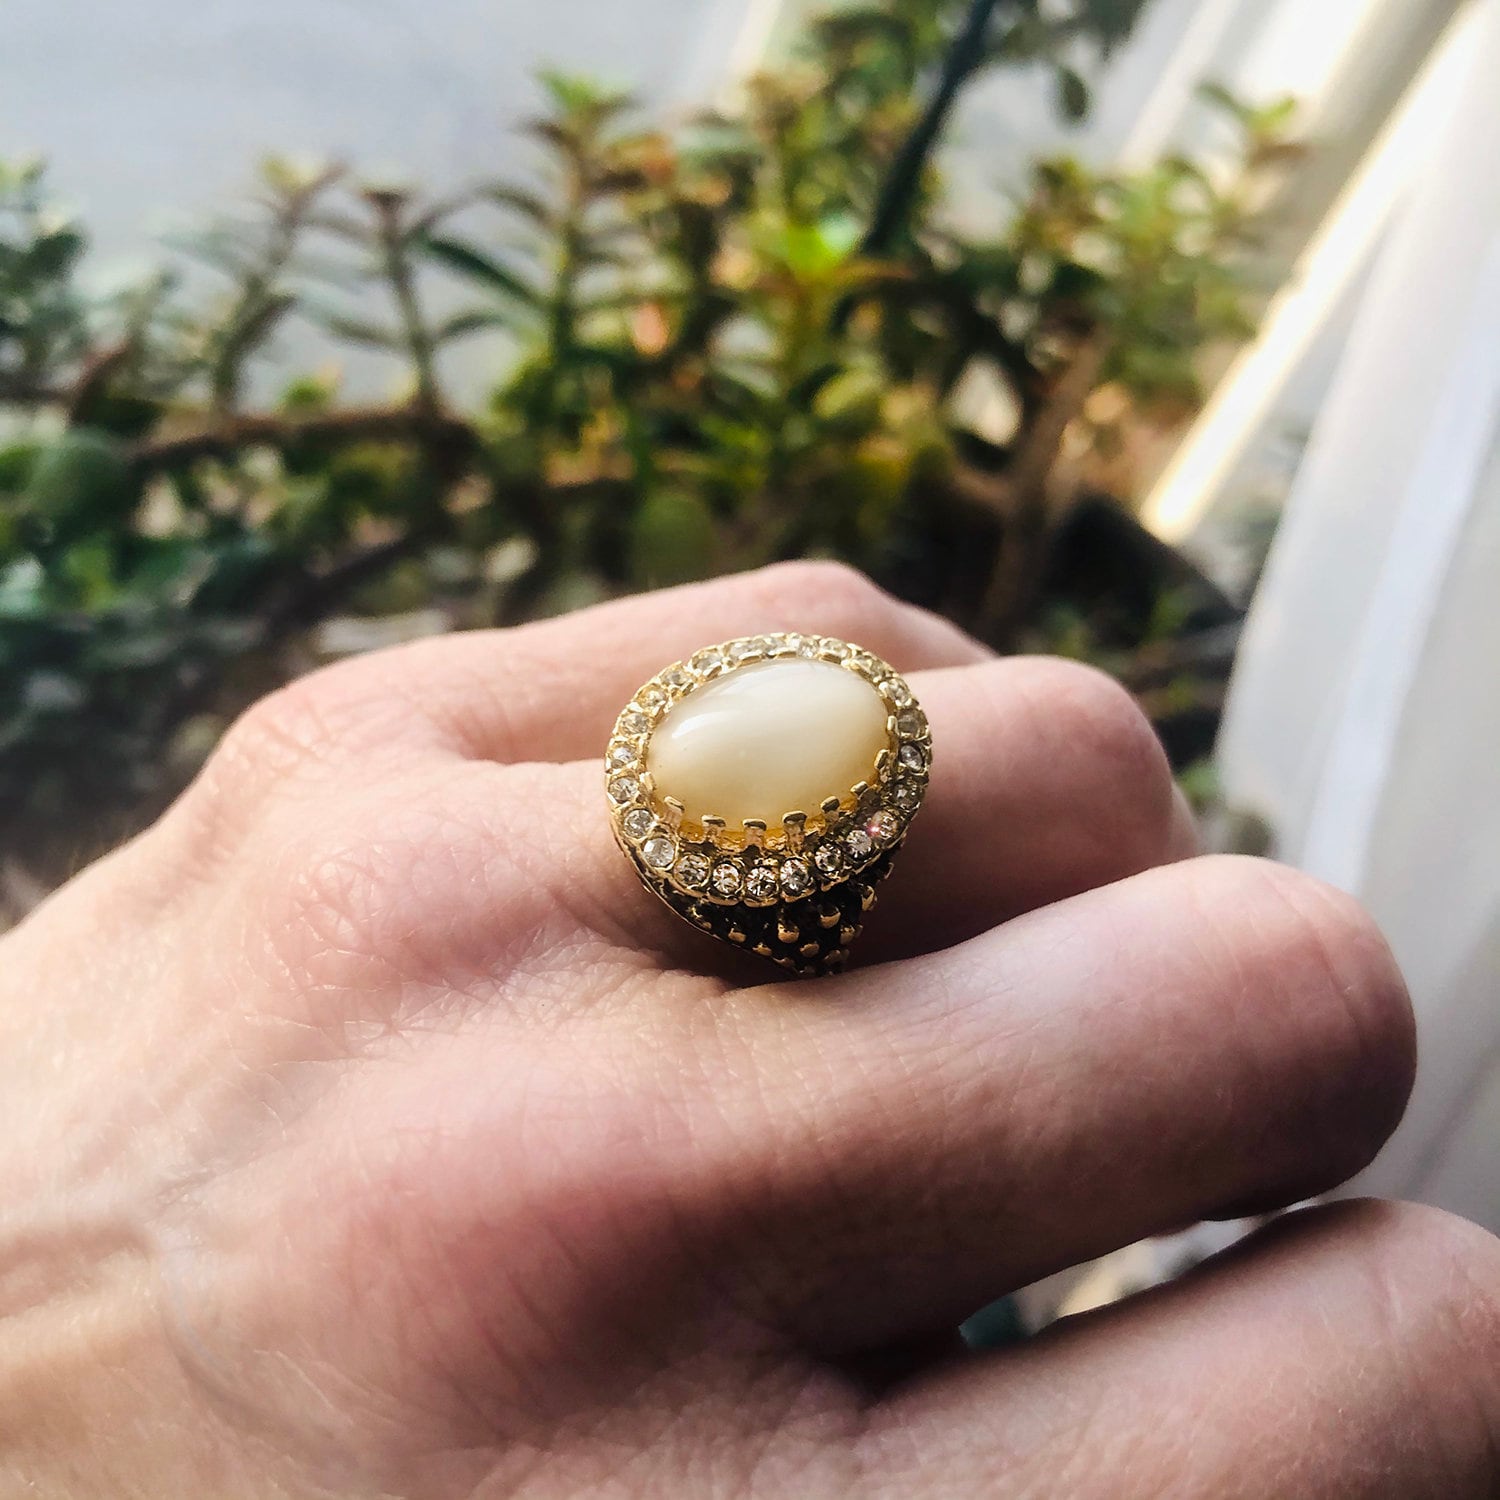 Vintage Ring Genuine Beige Moonstone and Clear Crystal Ring Edwardian Style Antique 18k Gold Ring Womans R169 - Limited Stock - Never Worn